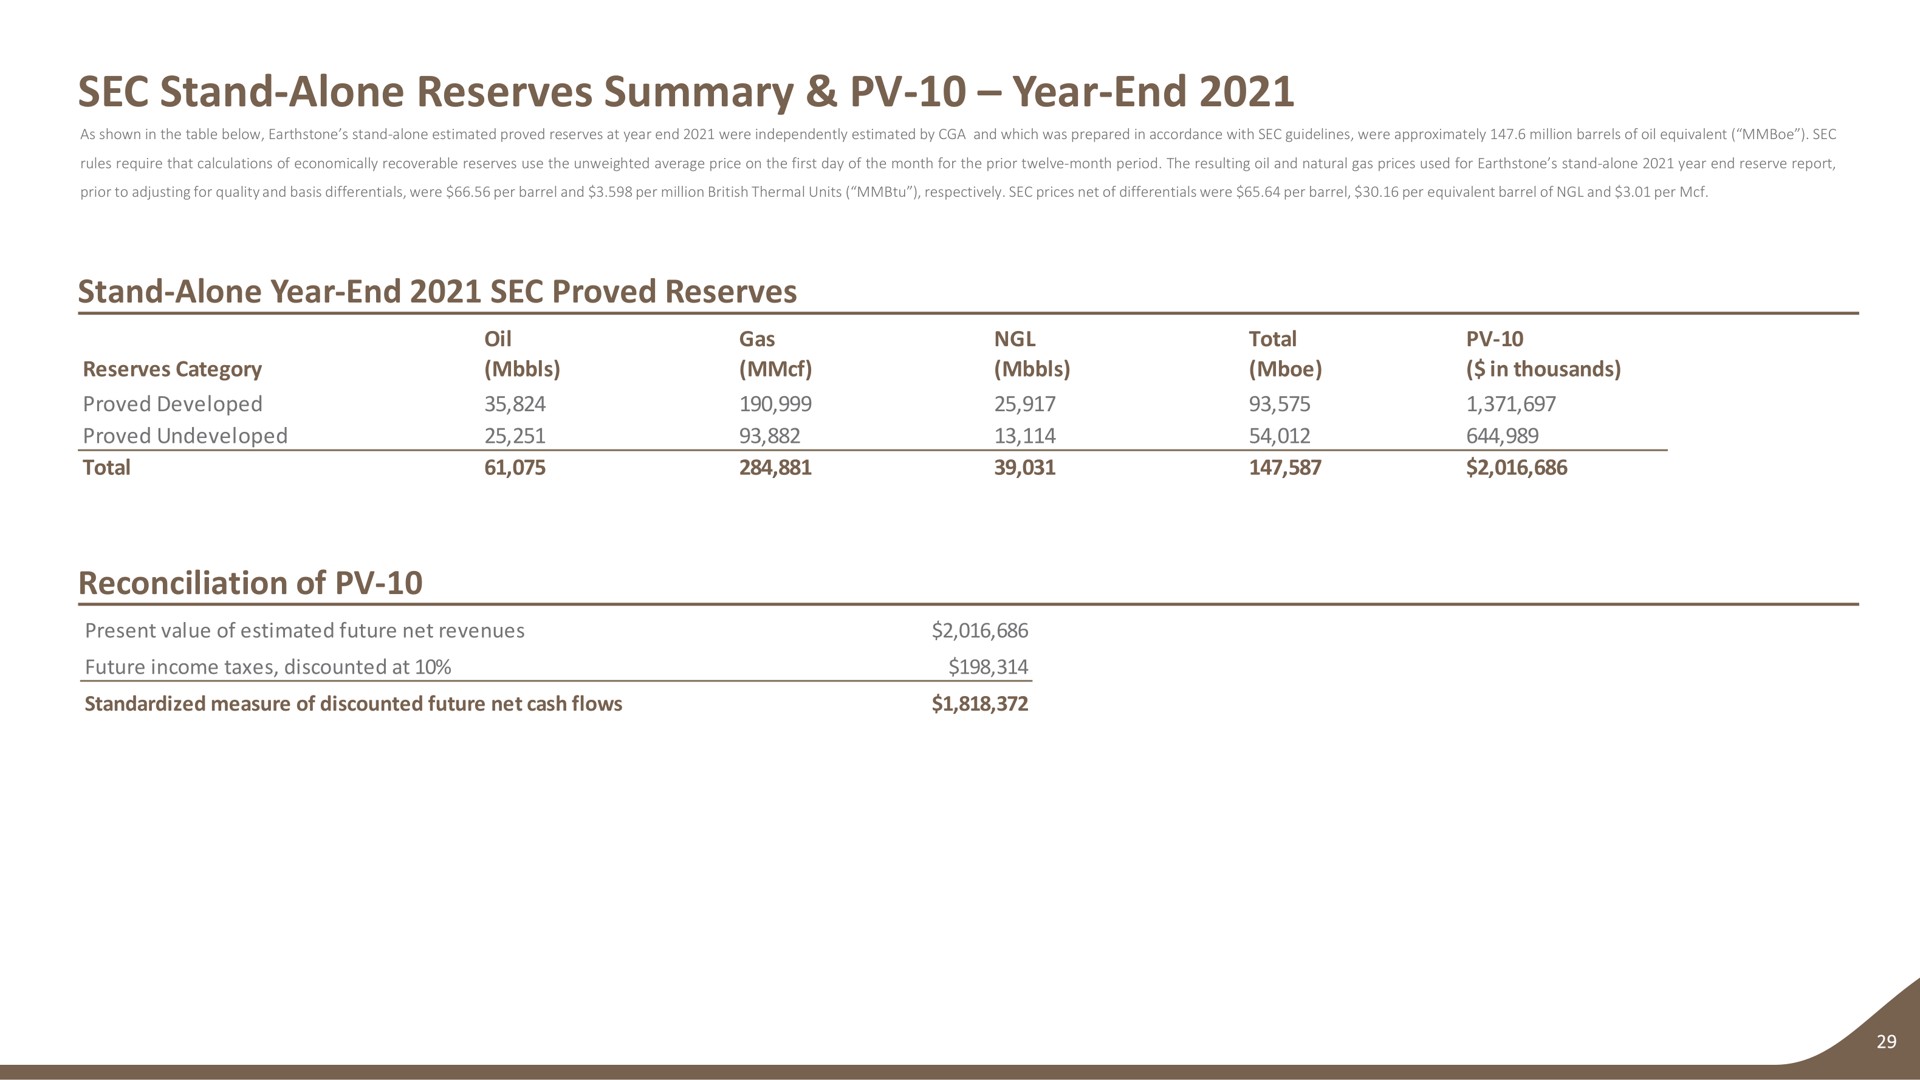 sec stand alone reserves summary year end stand alone year end sec proved reserves reconciliation of | Earthstone Energy